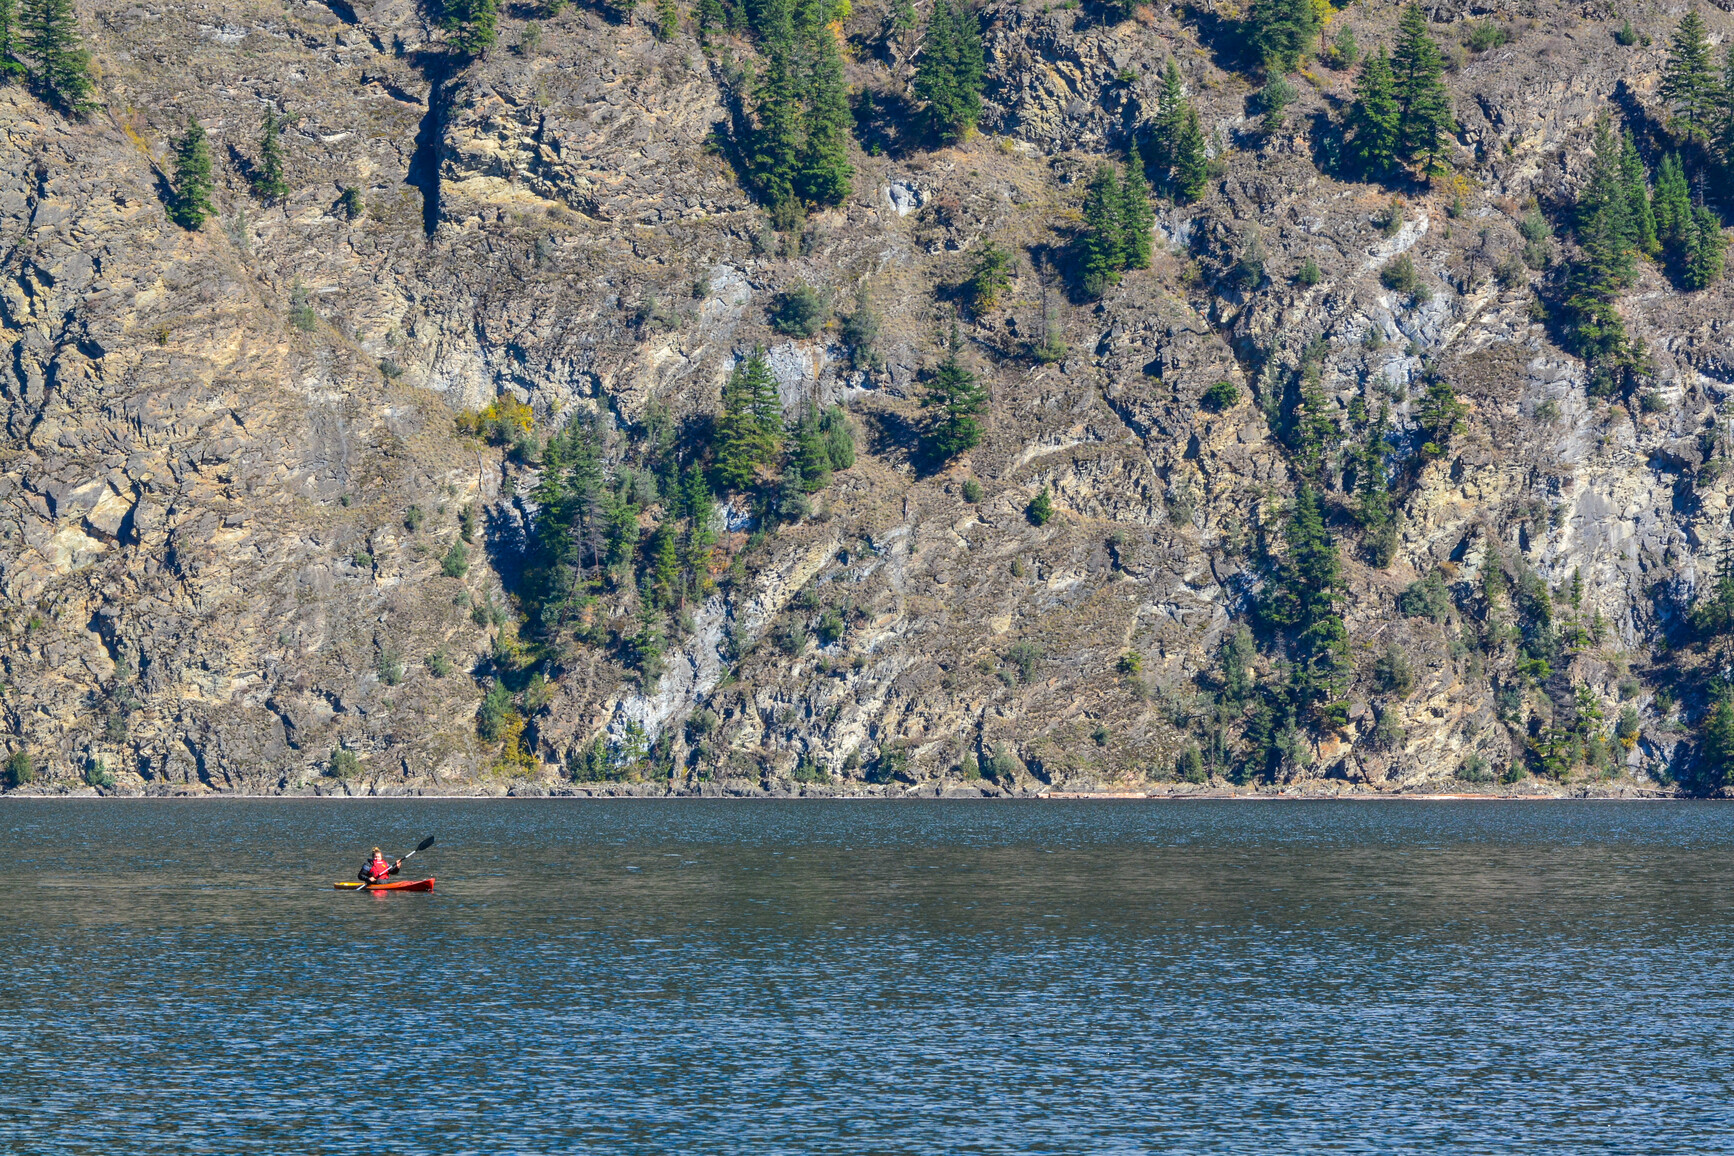 A park visitor kayaking on Adams Lake. Across the lake are rugged cliffs with a few trees.